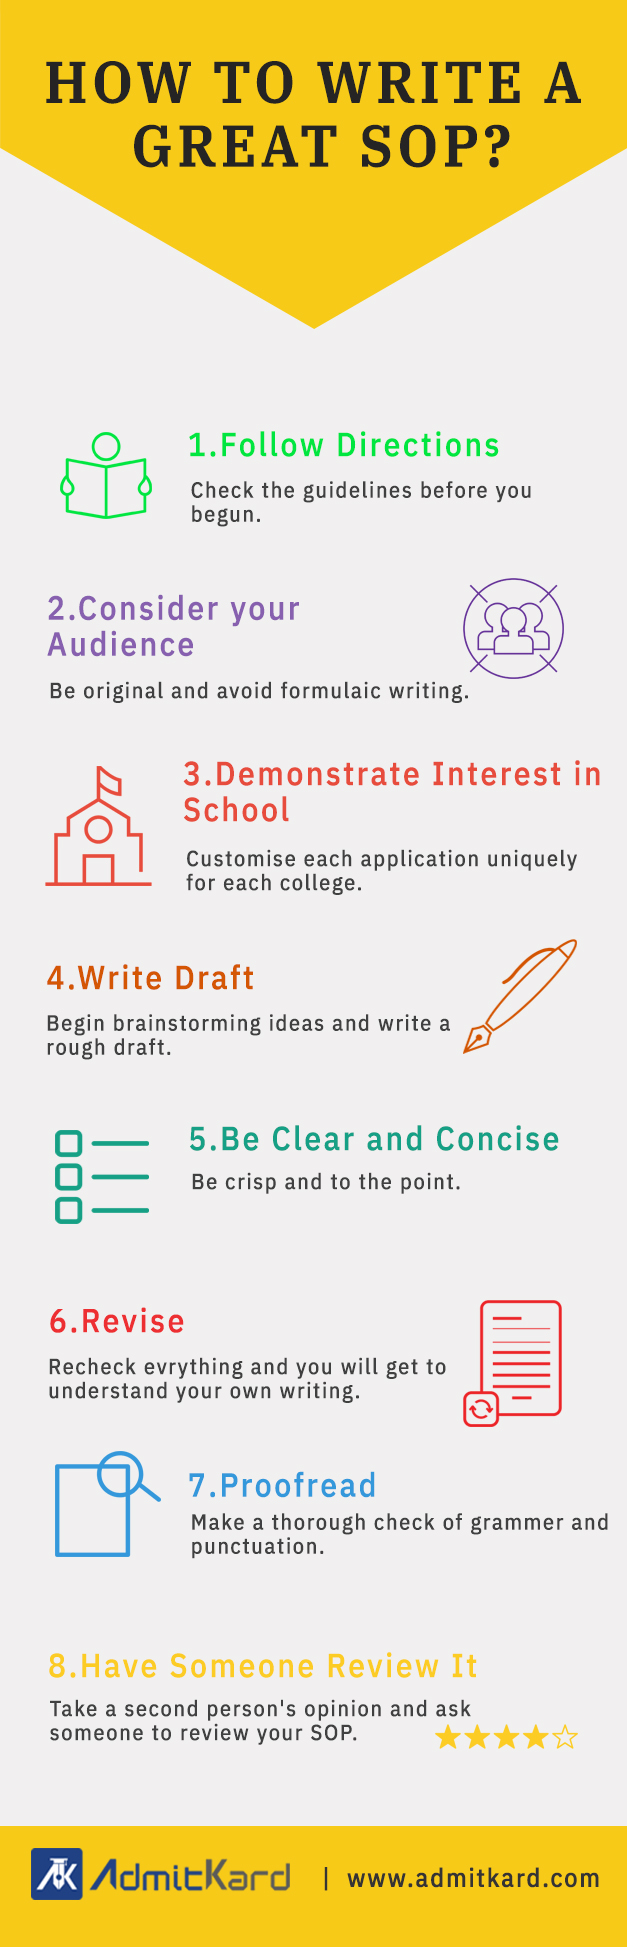 How to write a great SOP